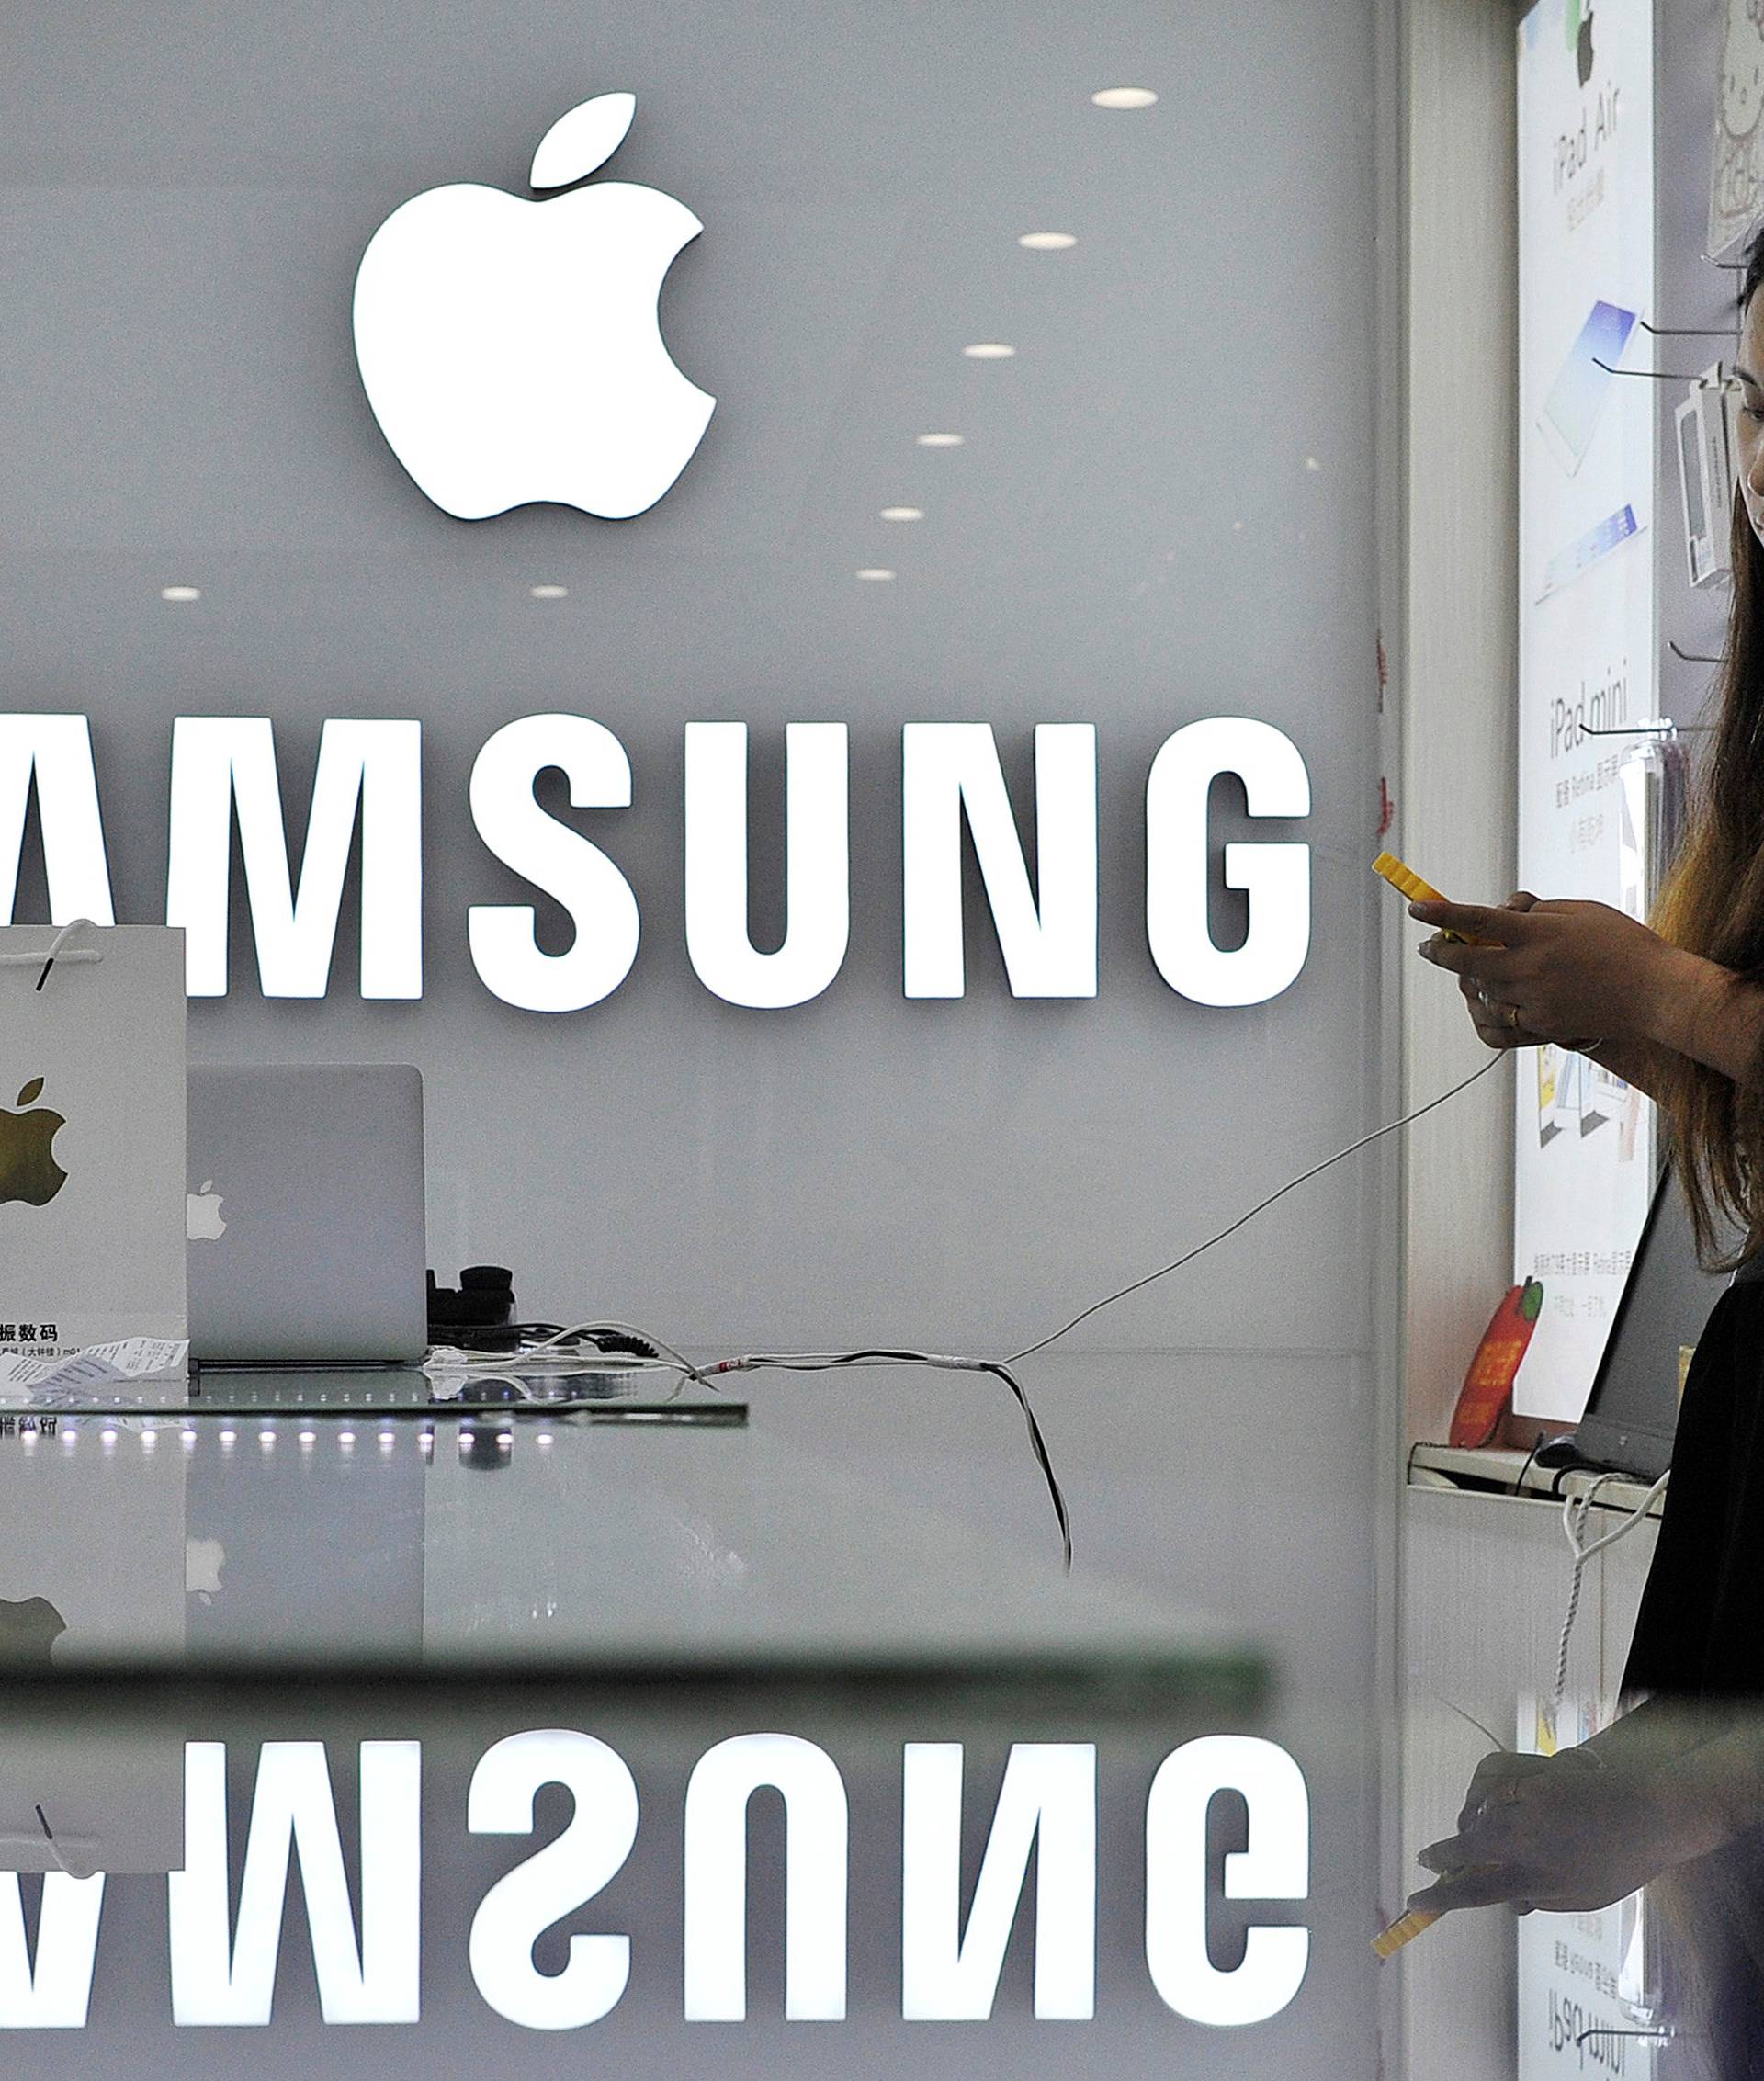 FILE PHOTO: A sales assistant uses her mobile phone next to the company logos of Apple and Samsung at a store in Hefei